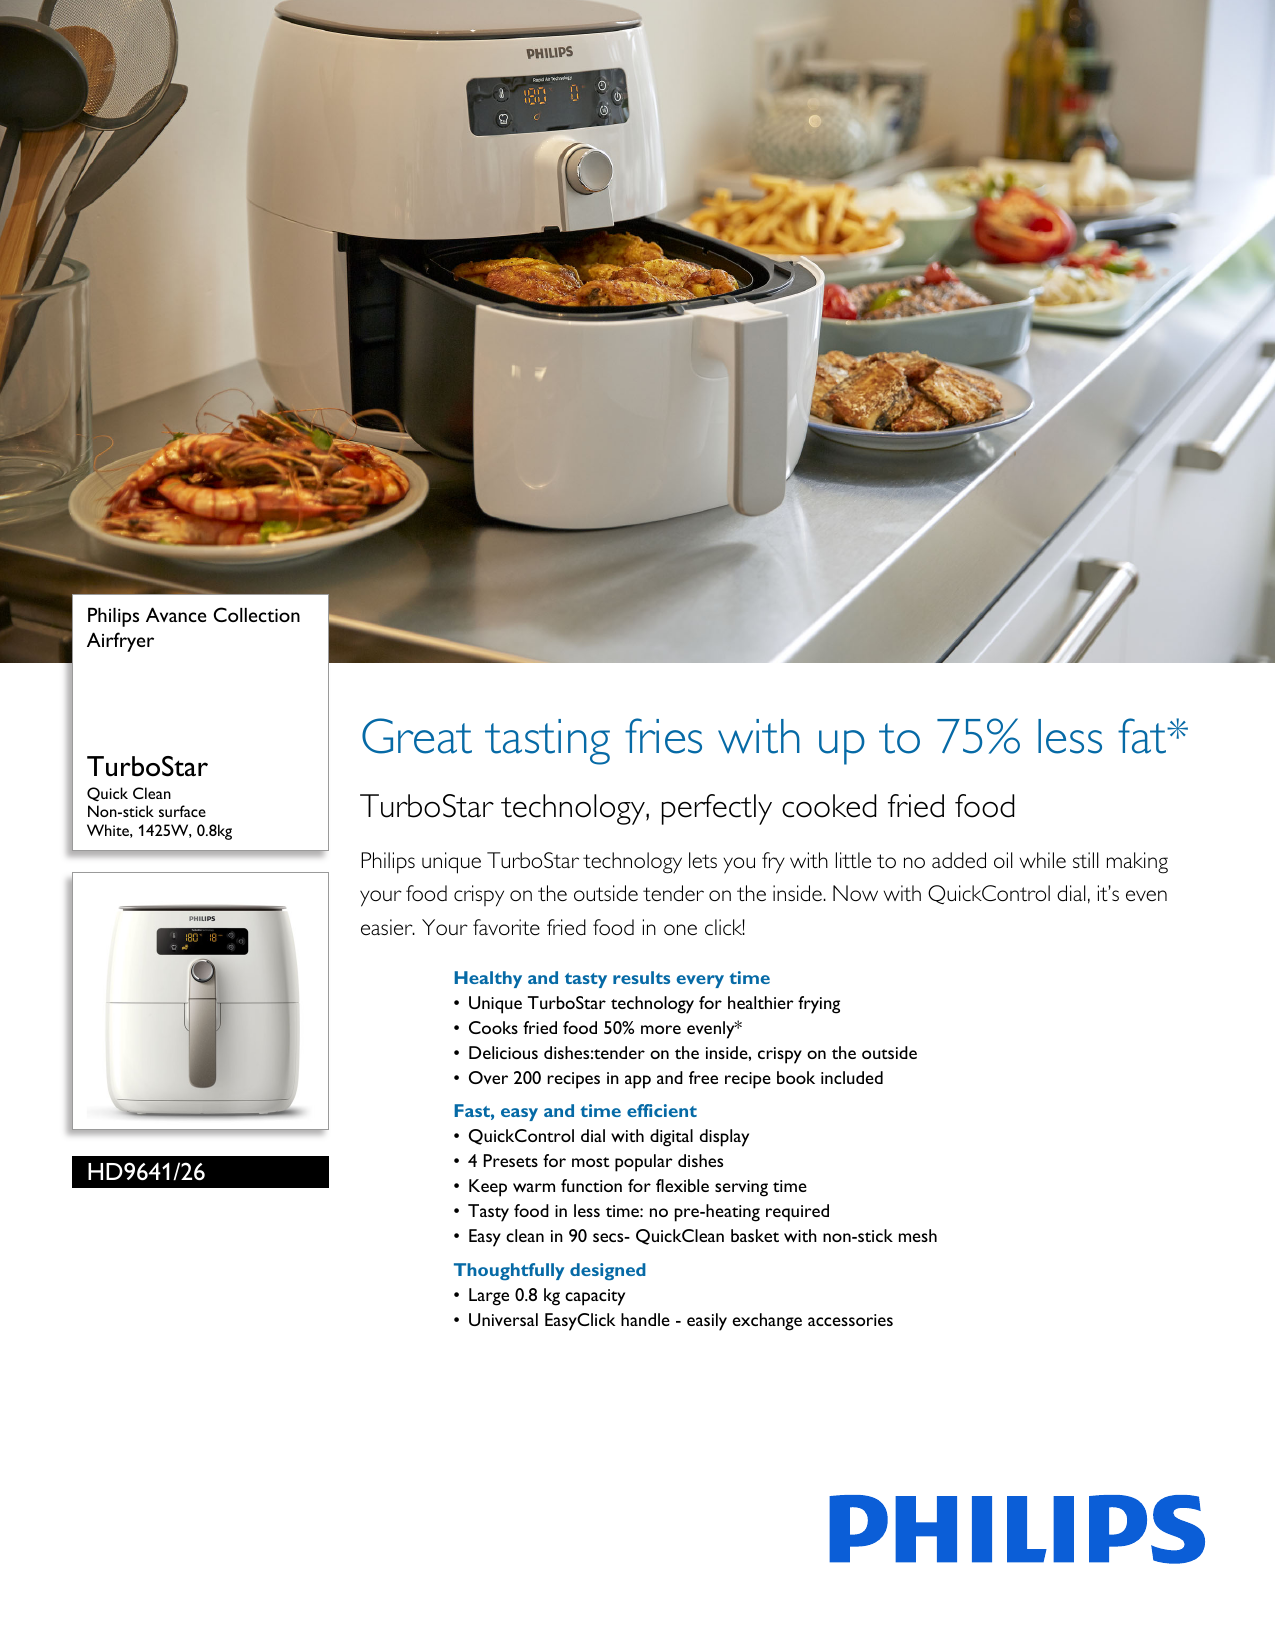 Philips Airfryer Instruction Manual